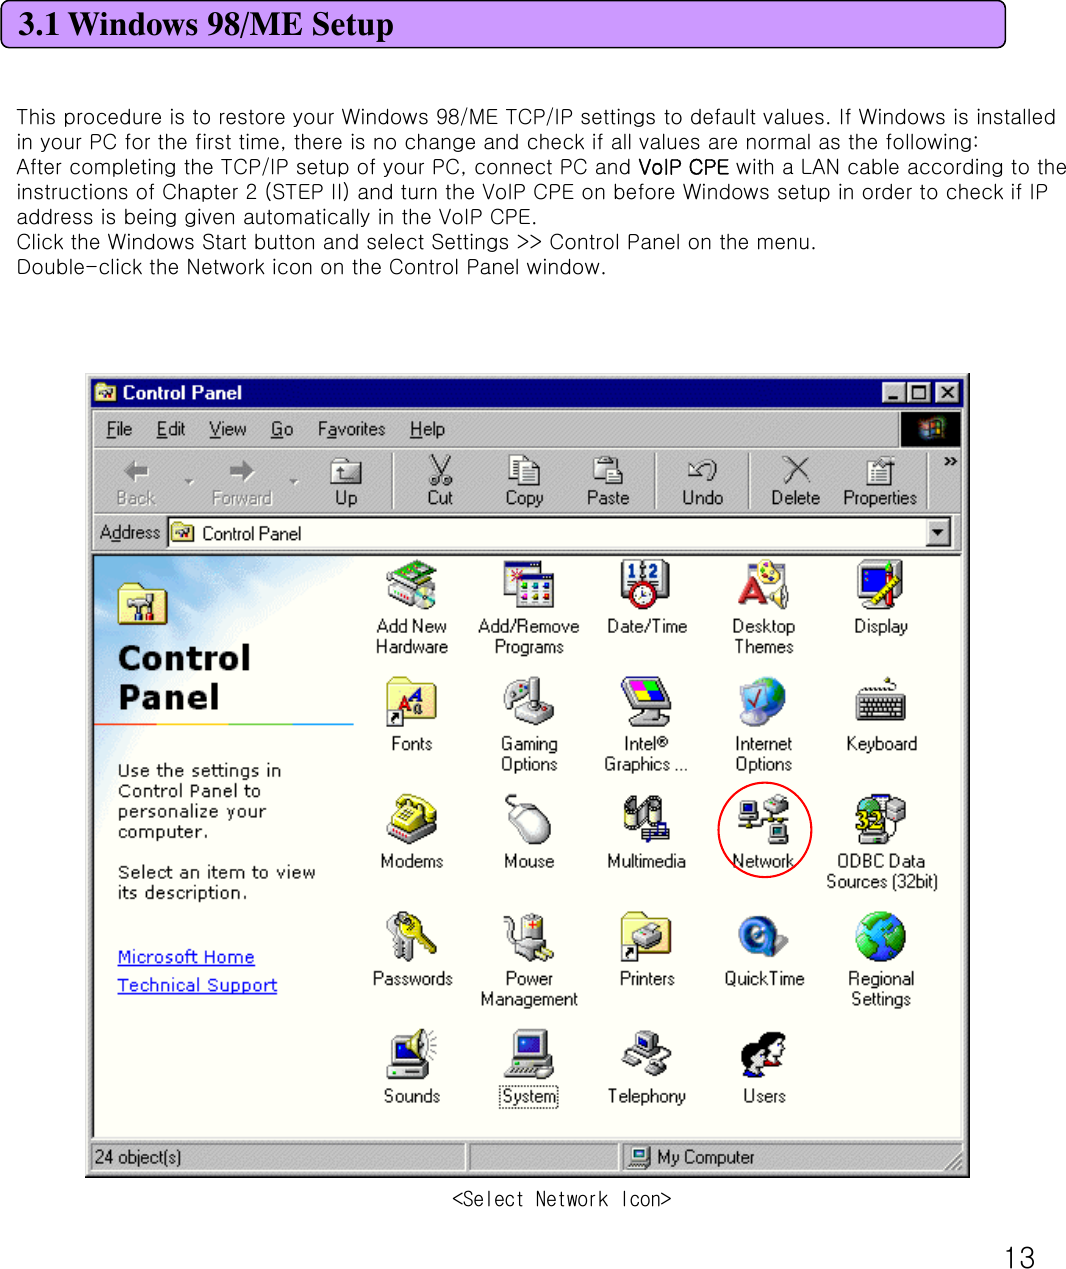 133.1 Windows 98/ME SetupThis procedure is to restore your Windows 98/ME TCP/IP settings to default values. If Windows is installed in your PC for the first time, there is no change and check if all values are normal as the following: After completing the TCP/IP setup of your PC, connect PC and VoIP CPE with a LAN cable according to the instructions of Chapter 2 (STEP II) and turn the VoIP CPE on before Windows setup in order to check if IP address is being given automatically in the VoIP CPE. Click the Windows Start button and select Settings &gt;&gt; Control Panel on the menu. Double-click the Network icon on the Control Panel window. &lt;Select Network Icon&gt;